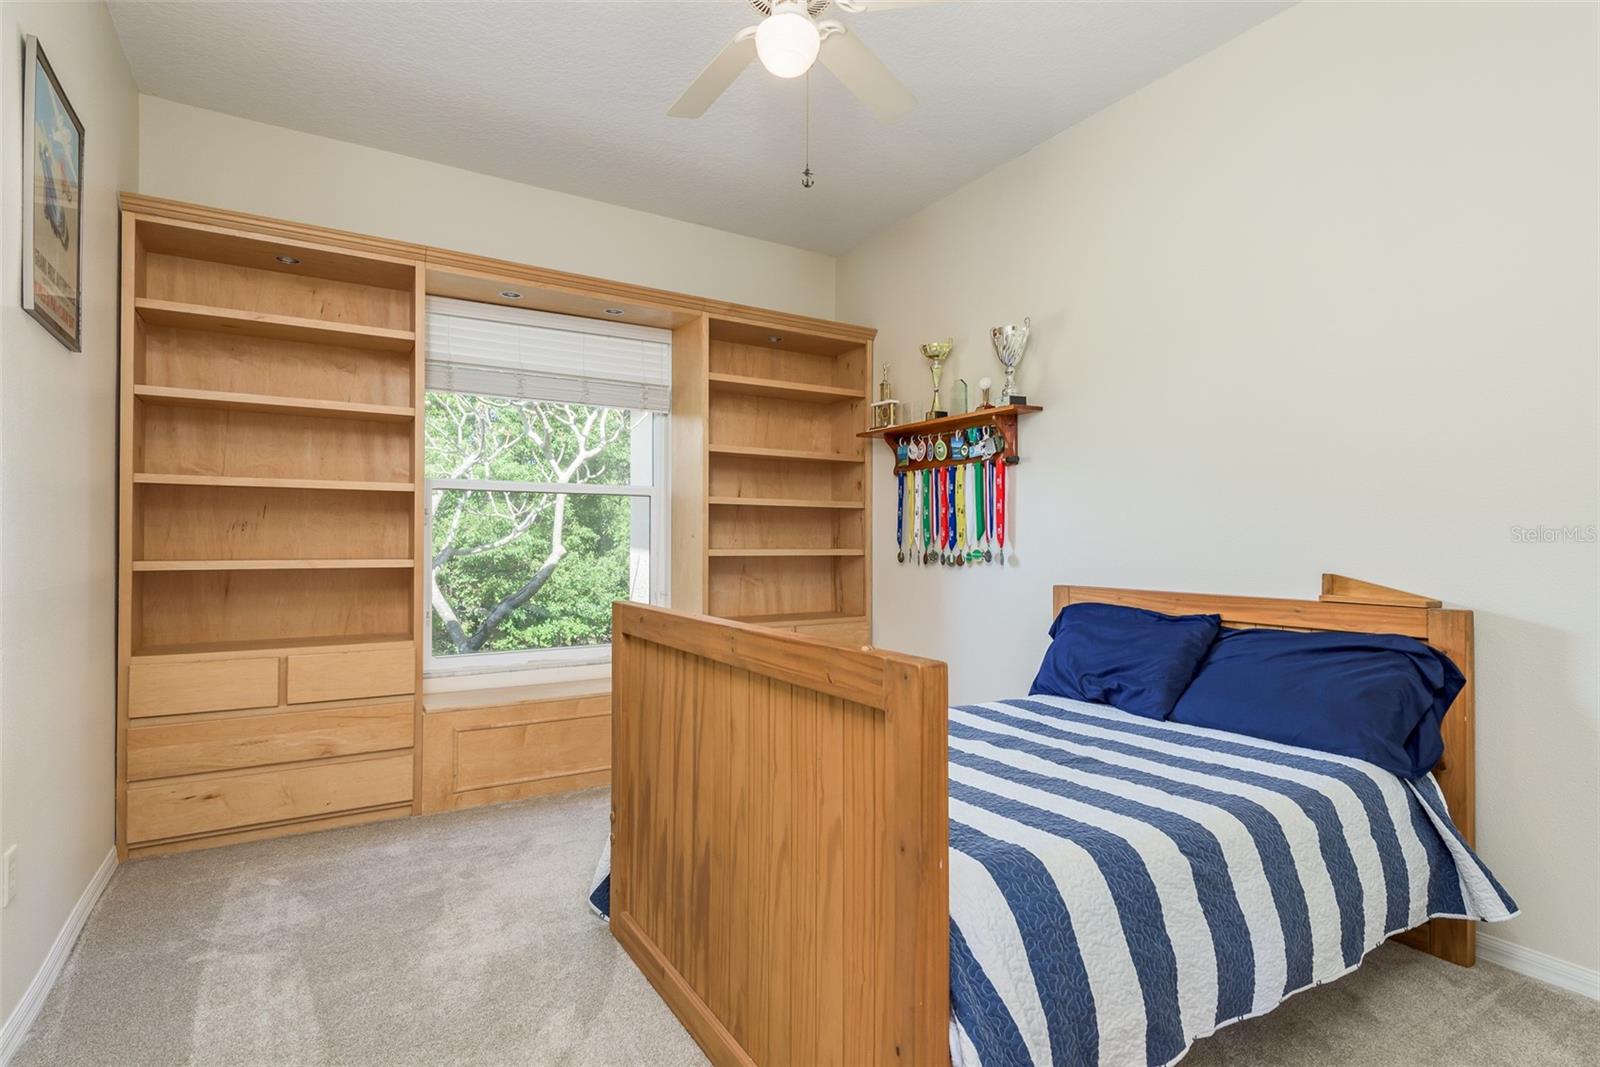 Bedroom 3 showcases a walk-in closet with built-in storage nestled within the room, offering a seamless blend of functionality and aesthetics, ensuring every inch of space is utilized efficiently while maintaining a clean and stylish interior design.